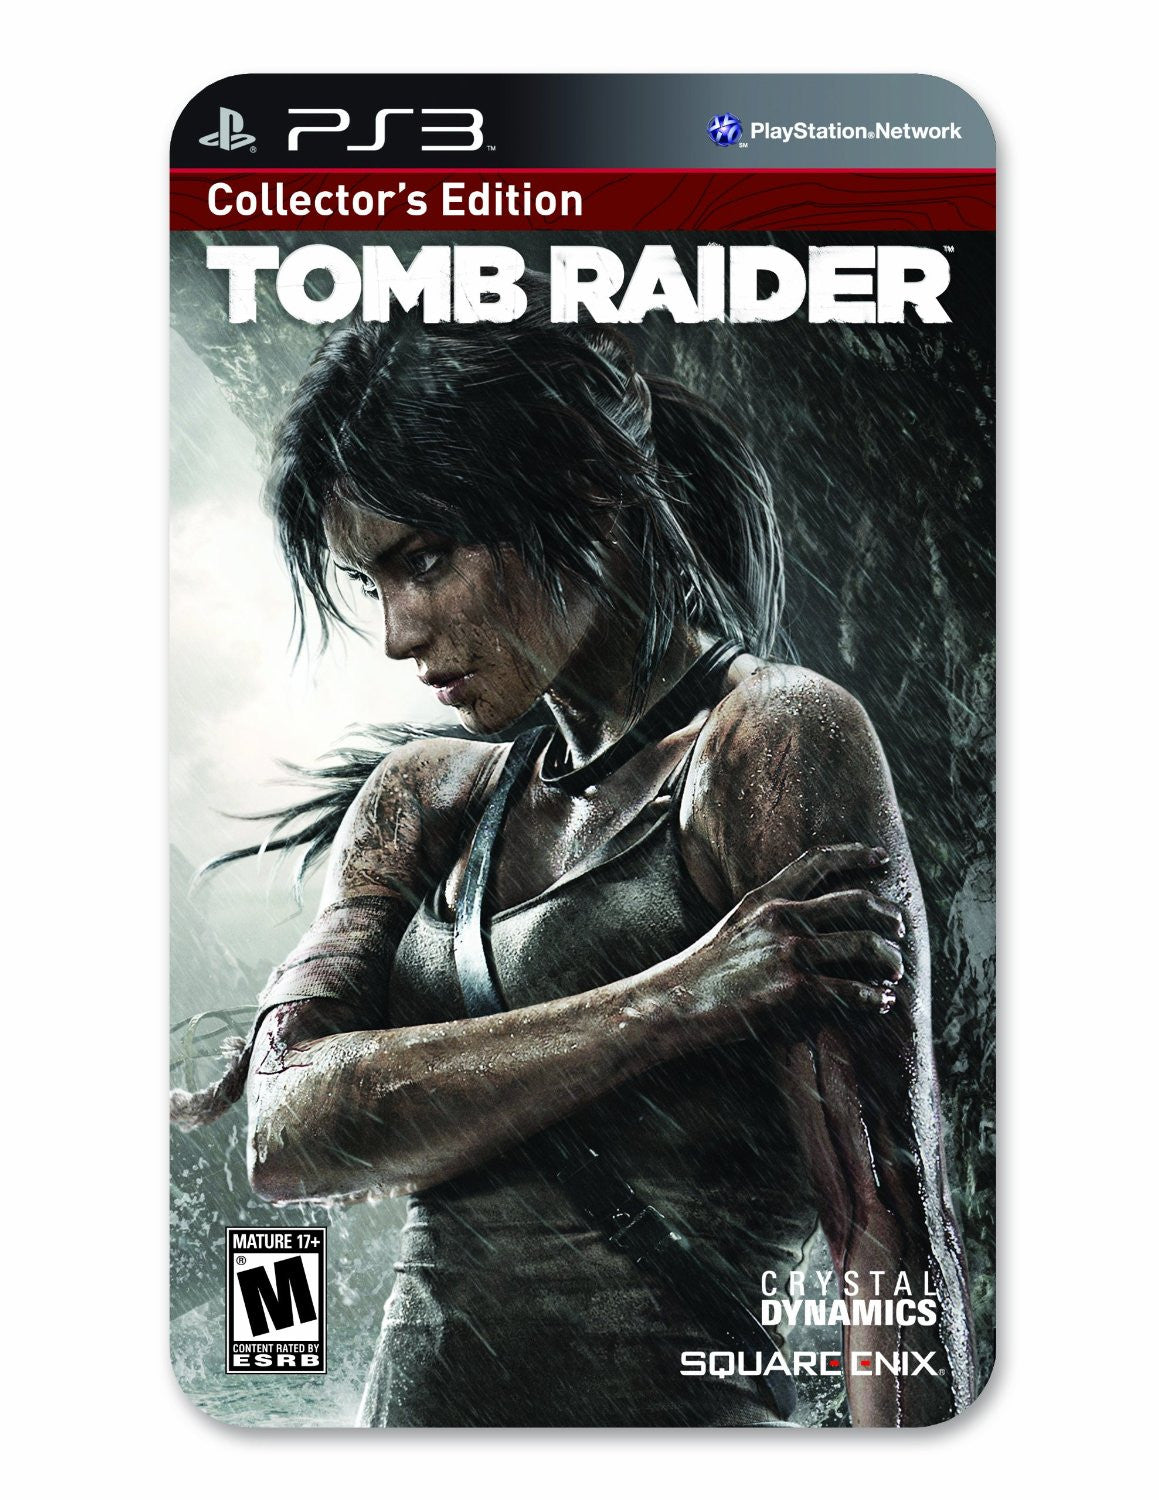 Tomb Raider Collector's Edition - PlayStation 3